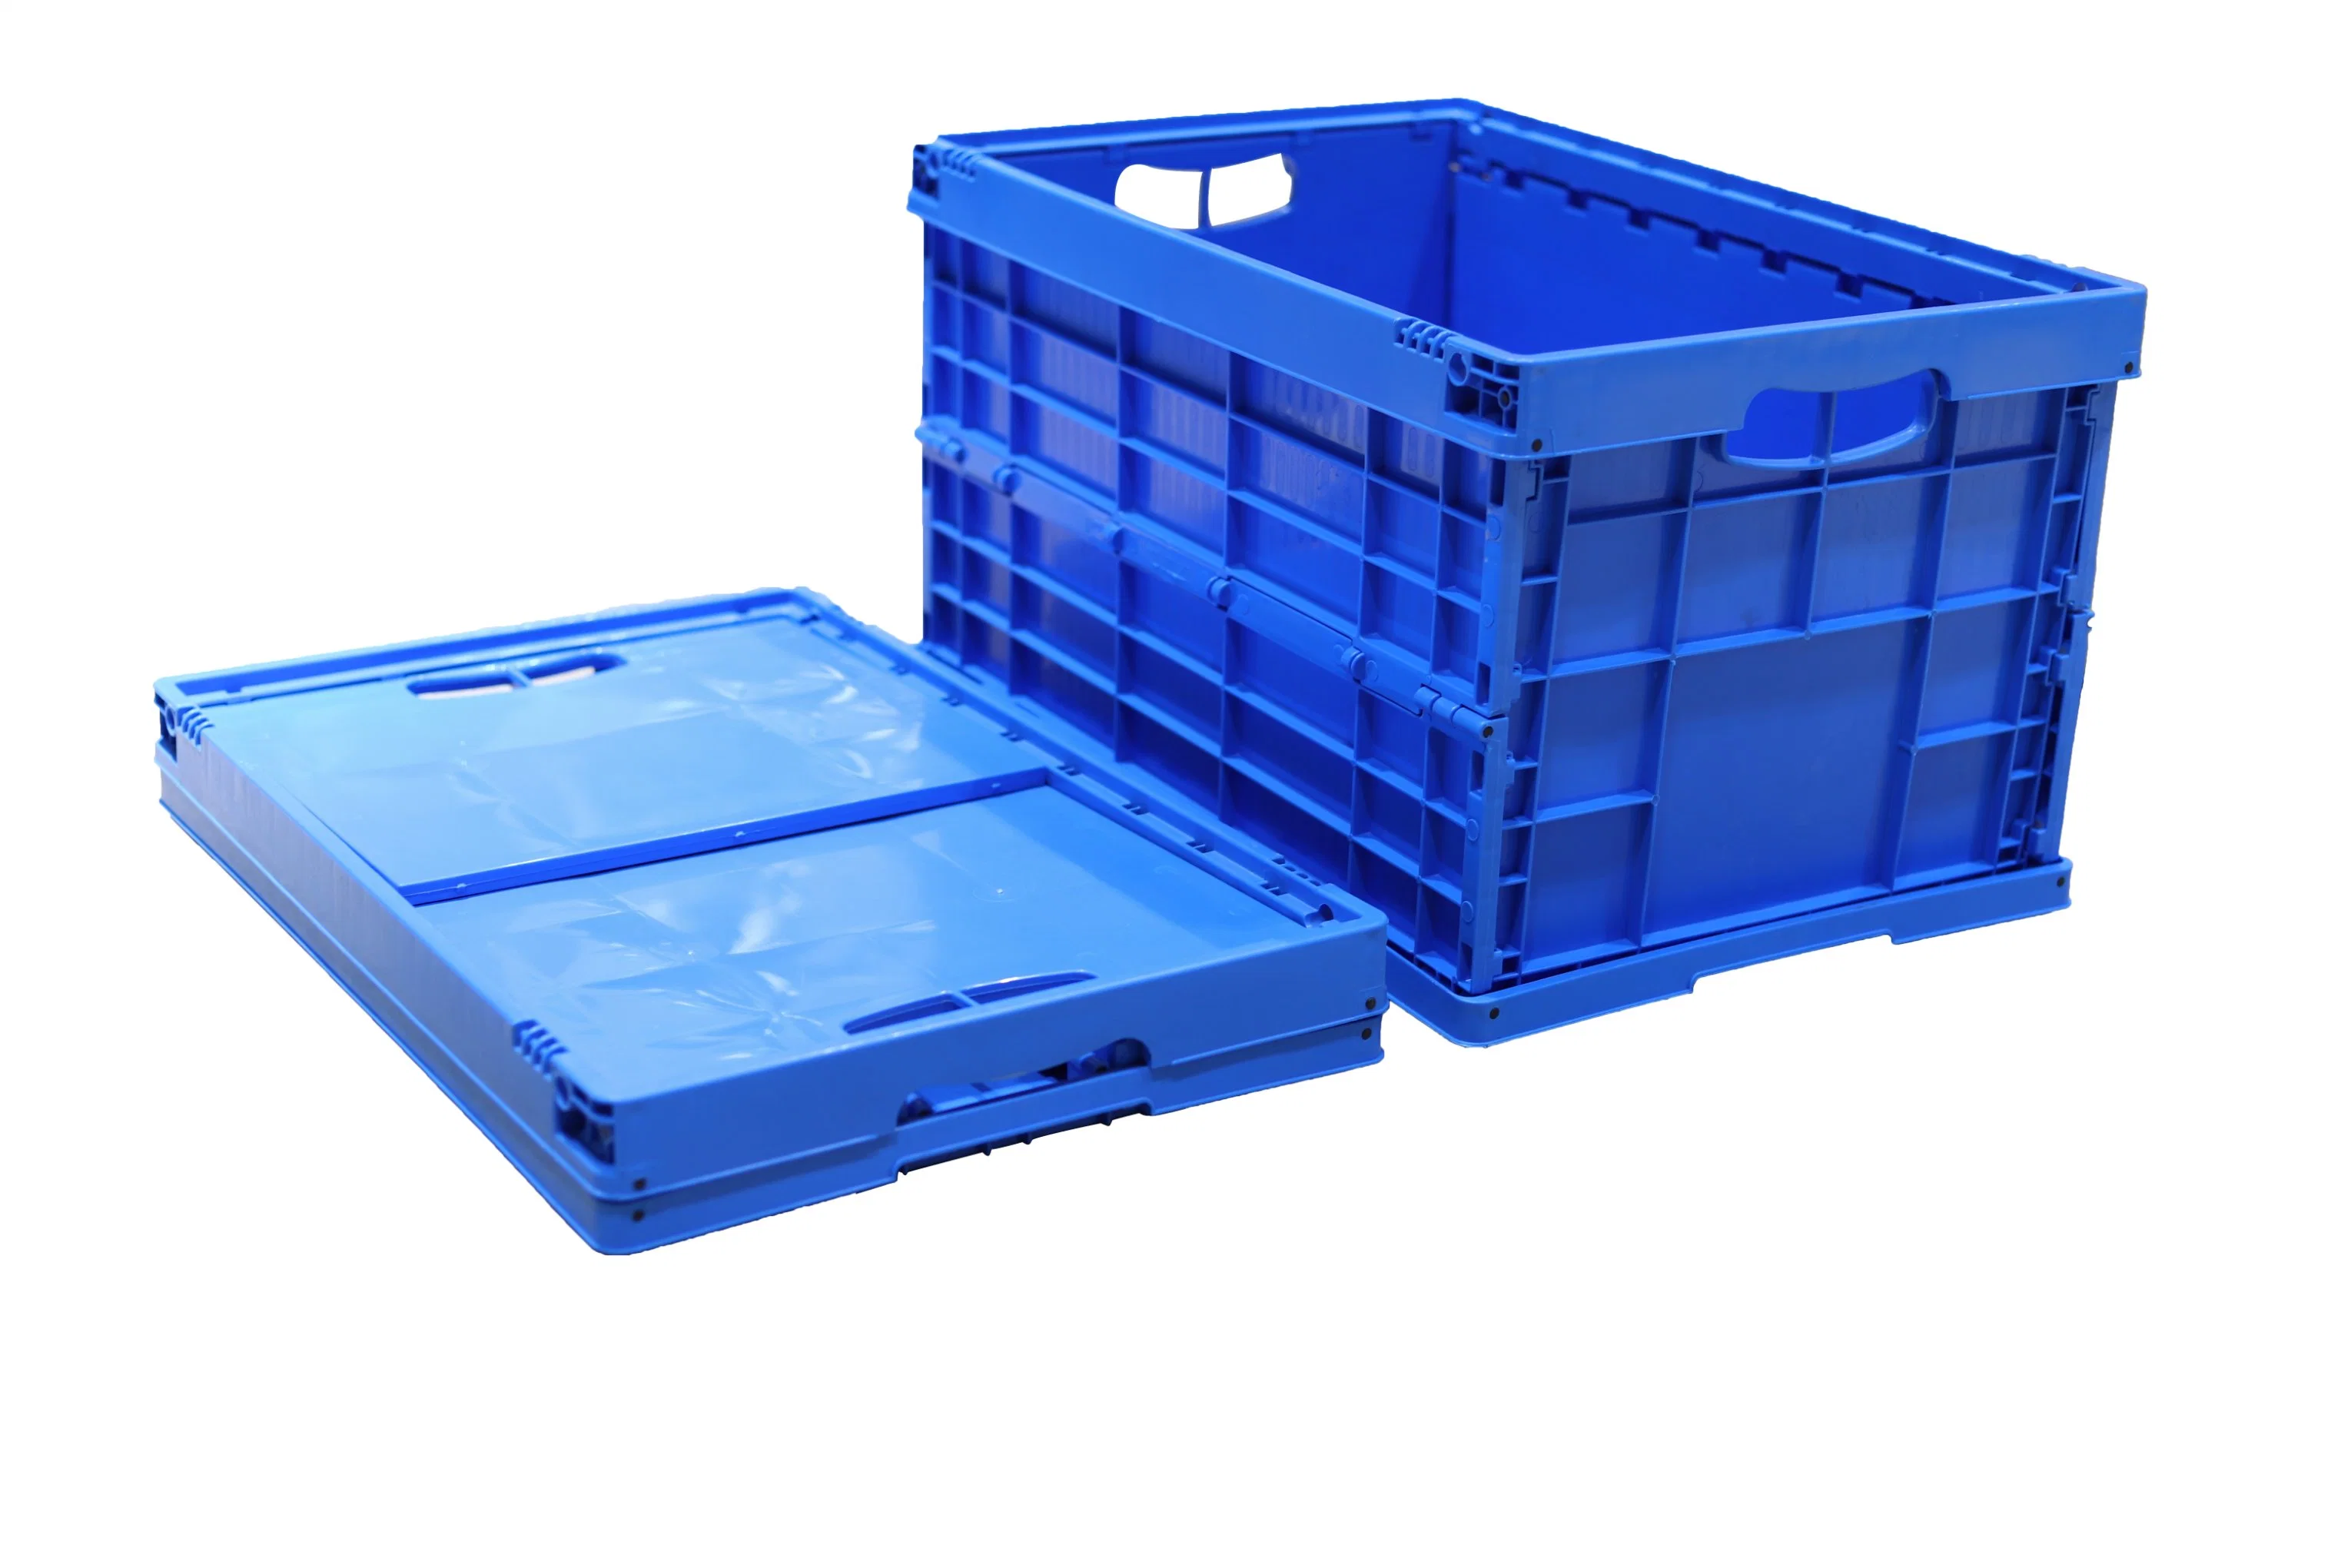 Jujing Folding Turnover Box with Lid, Stackable Fruits & Vegetable Blue Storage Crate Plastic Turnover Box